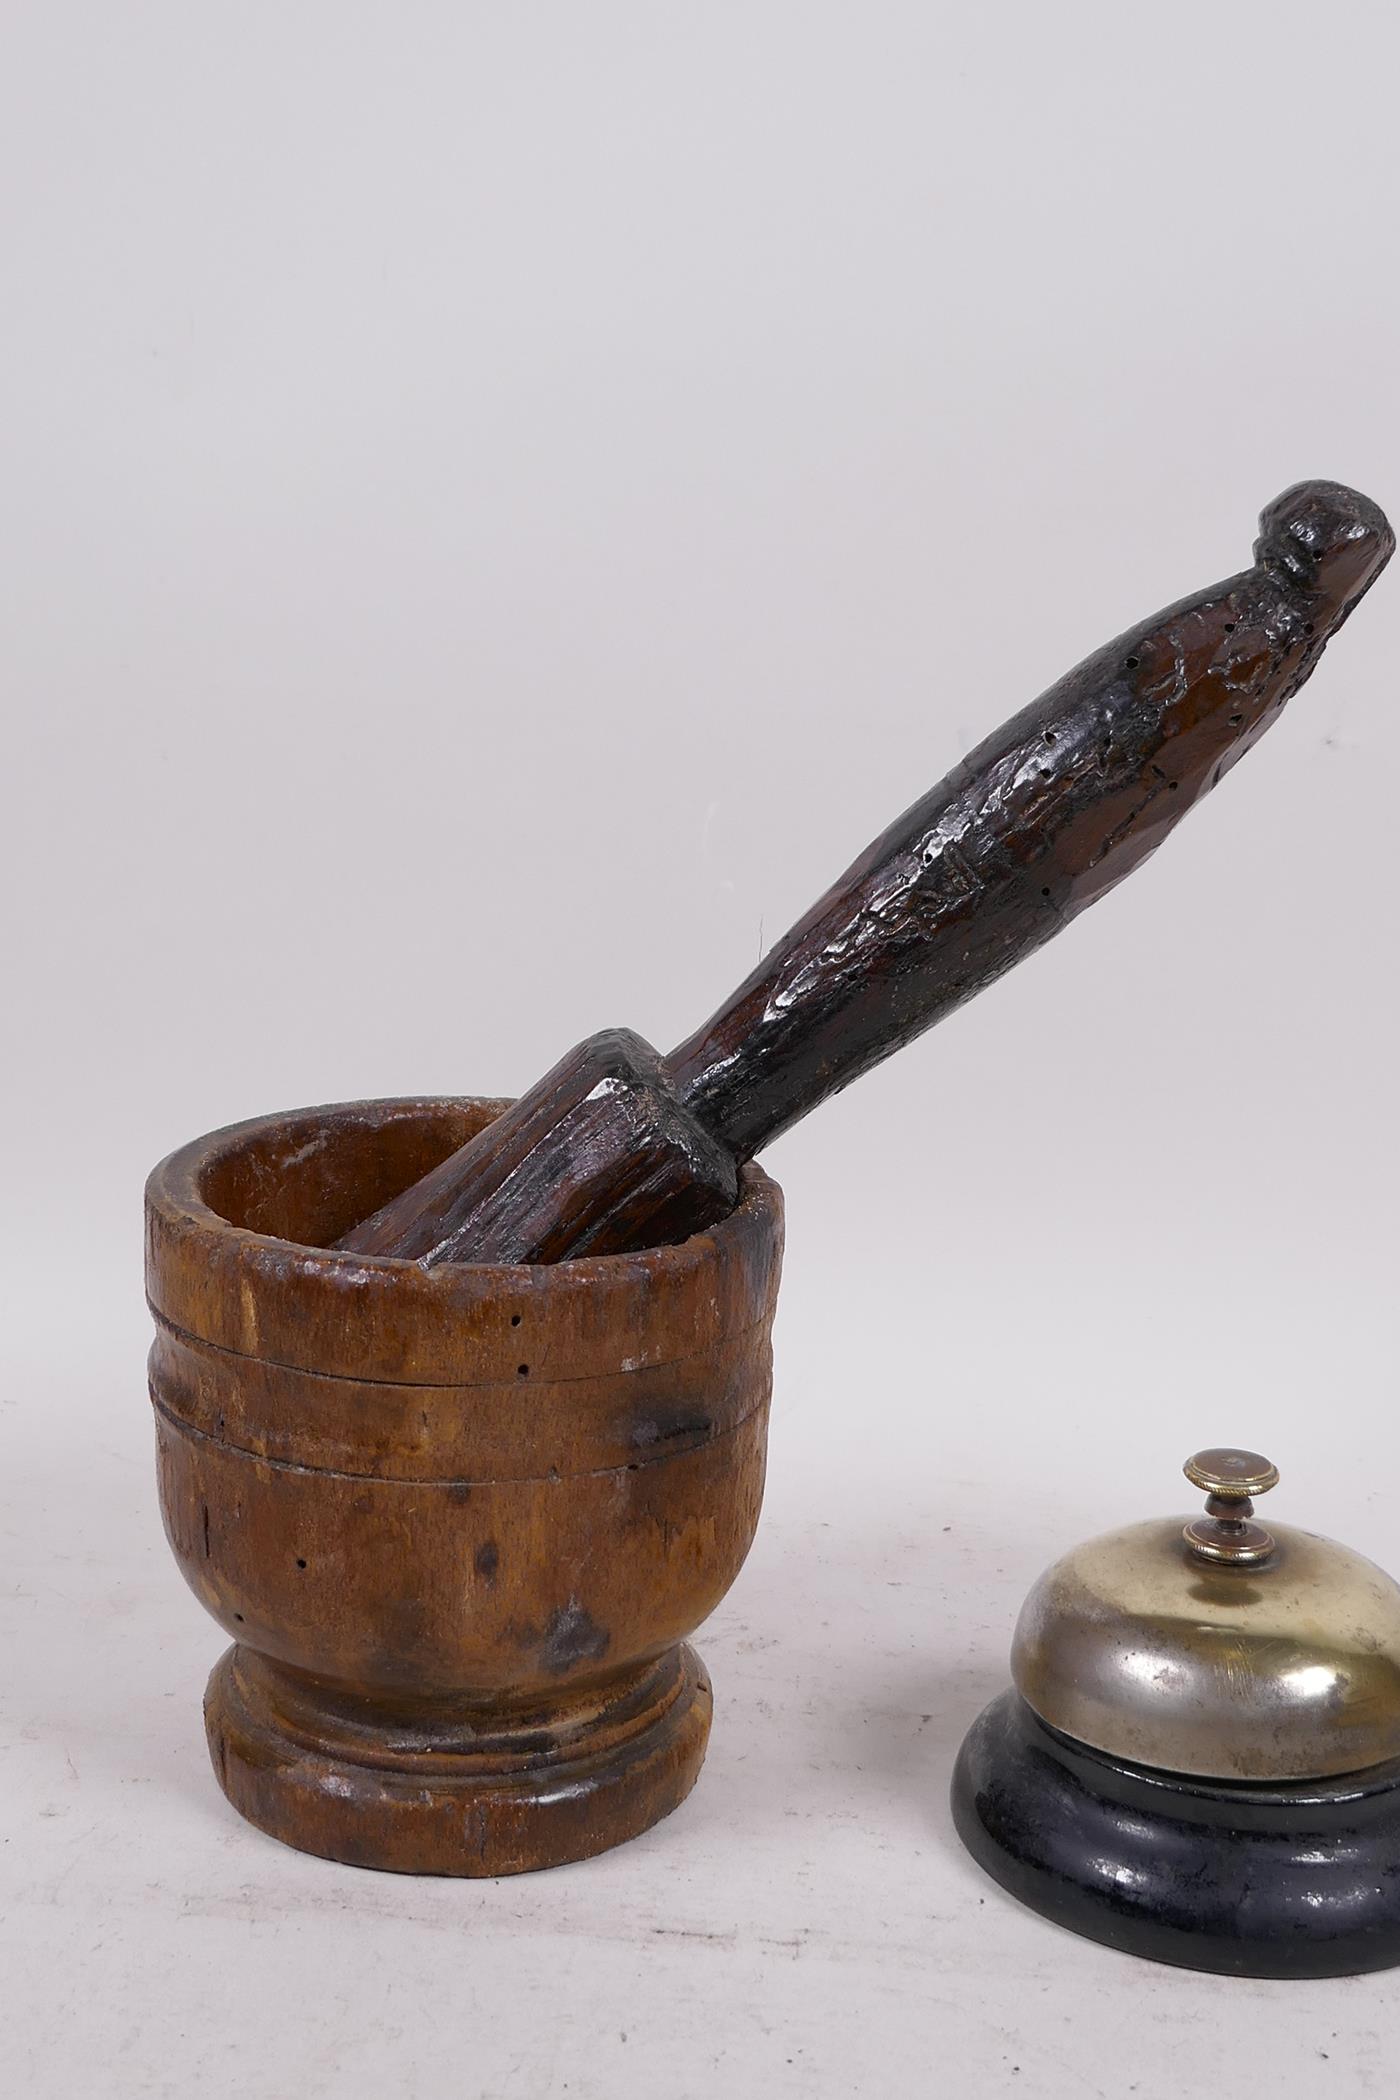 An antique French wooden mortar and pestle, mortar 4" high, and a reception desk bell - Image 2 of 3